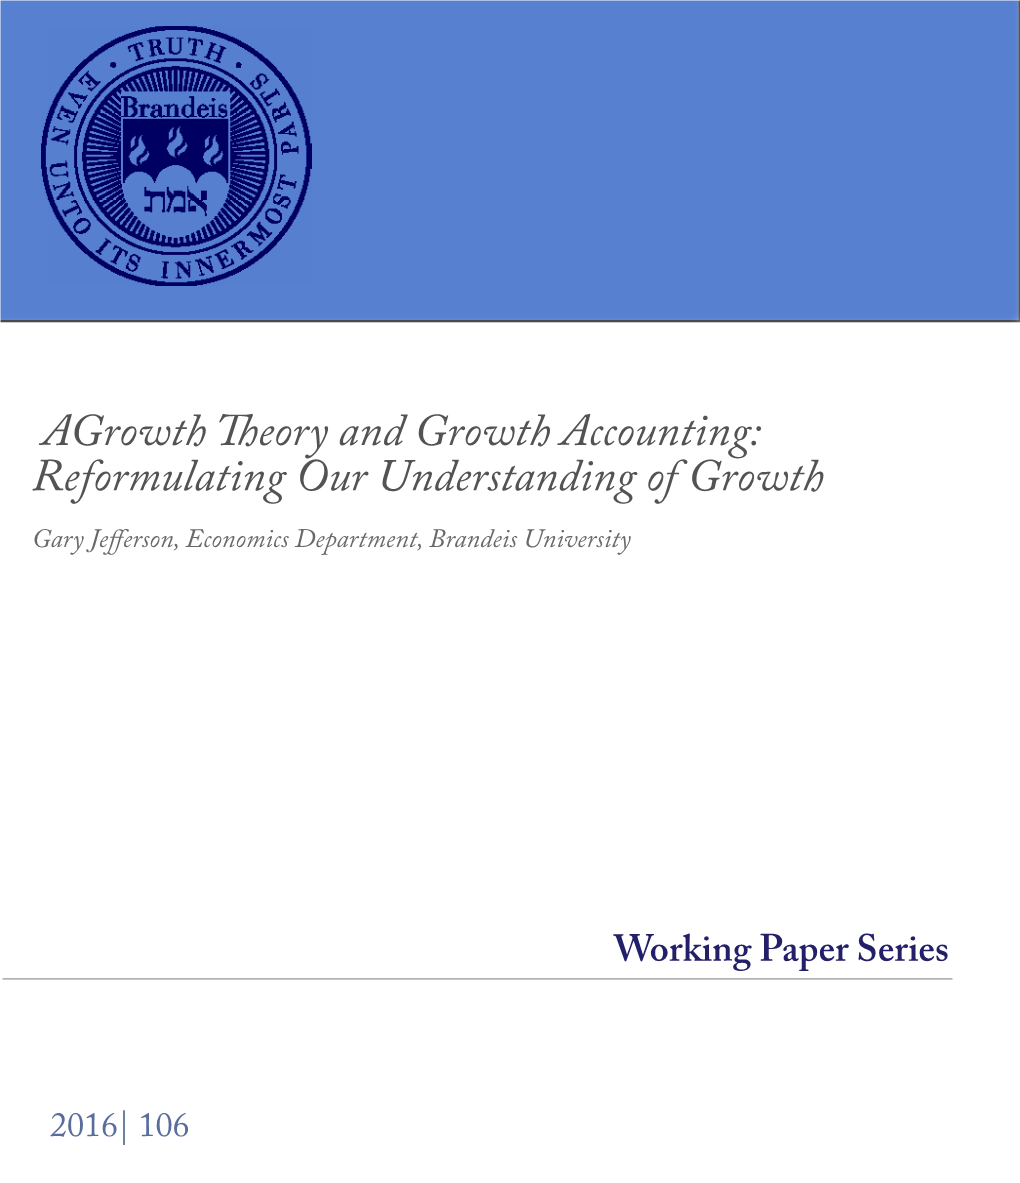 Agrowth Theory and Growth Accounting: Reformulating Our Understanding of Growth Gary Jefferson, Economics Department, Brandeis University